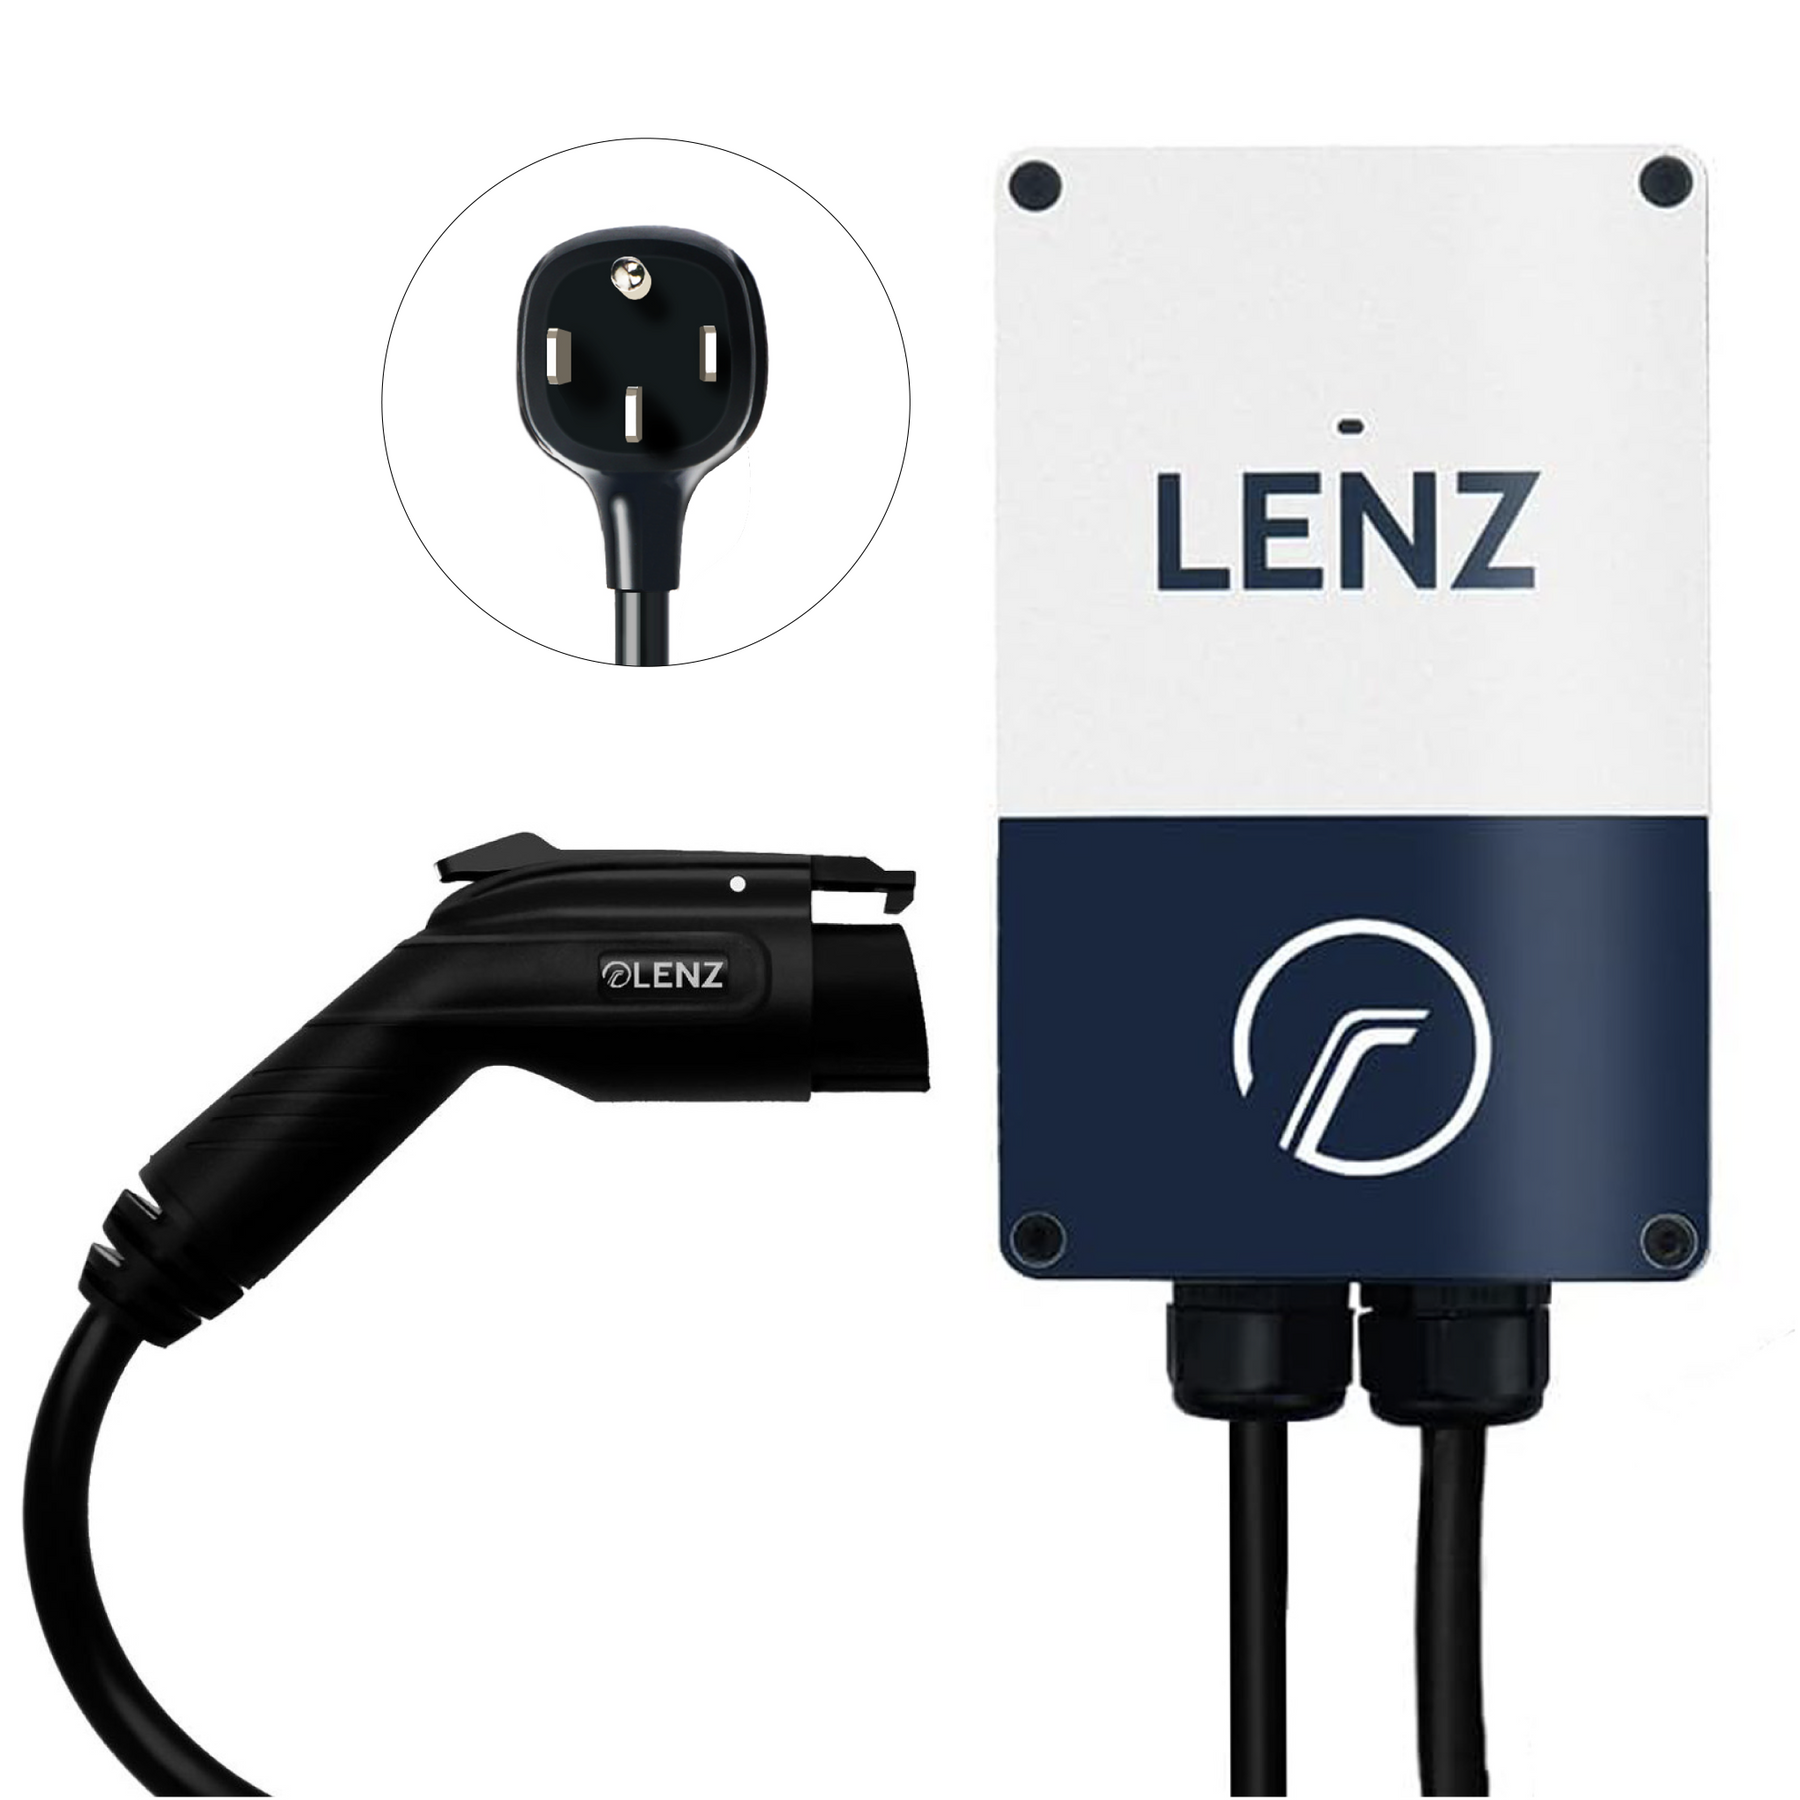 LENZ Level 2 Plugin 40 A Home Charger Weather-Proof Corrosion Resistant